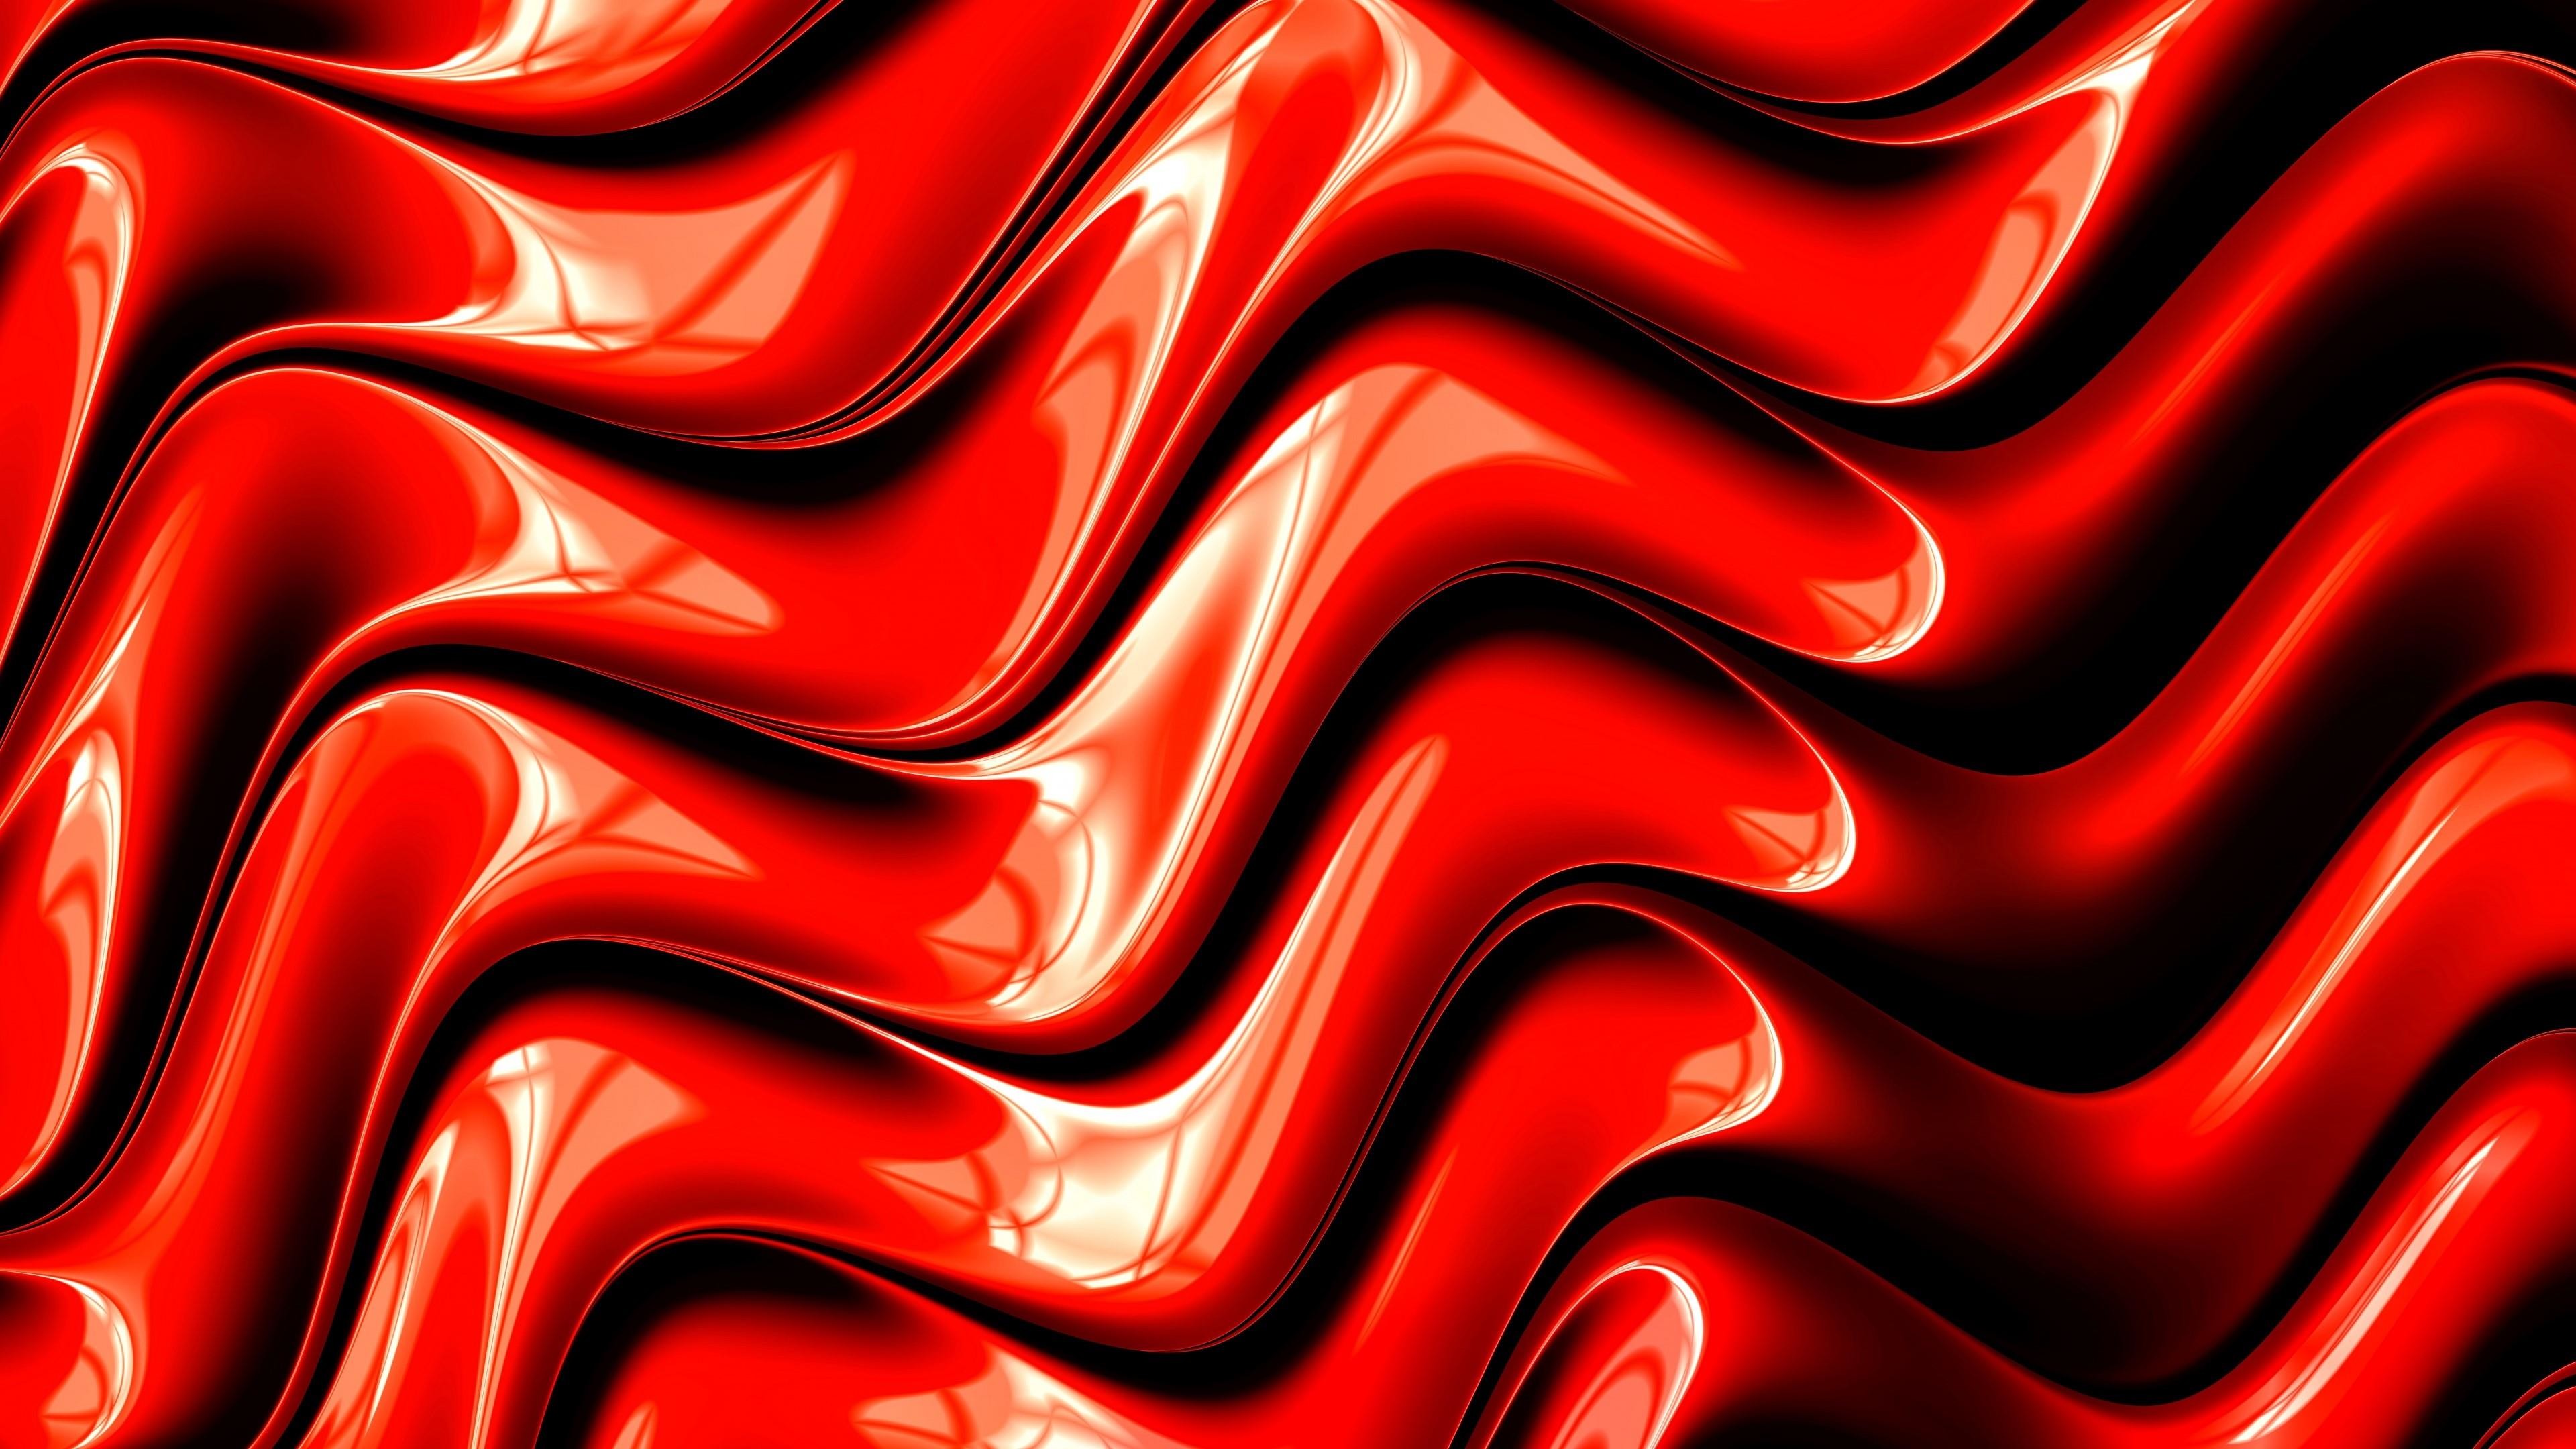 Red 3d Wallpaper Harmonious Wallpappers